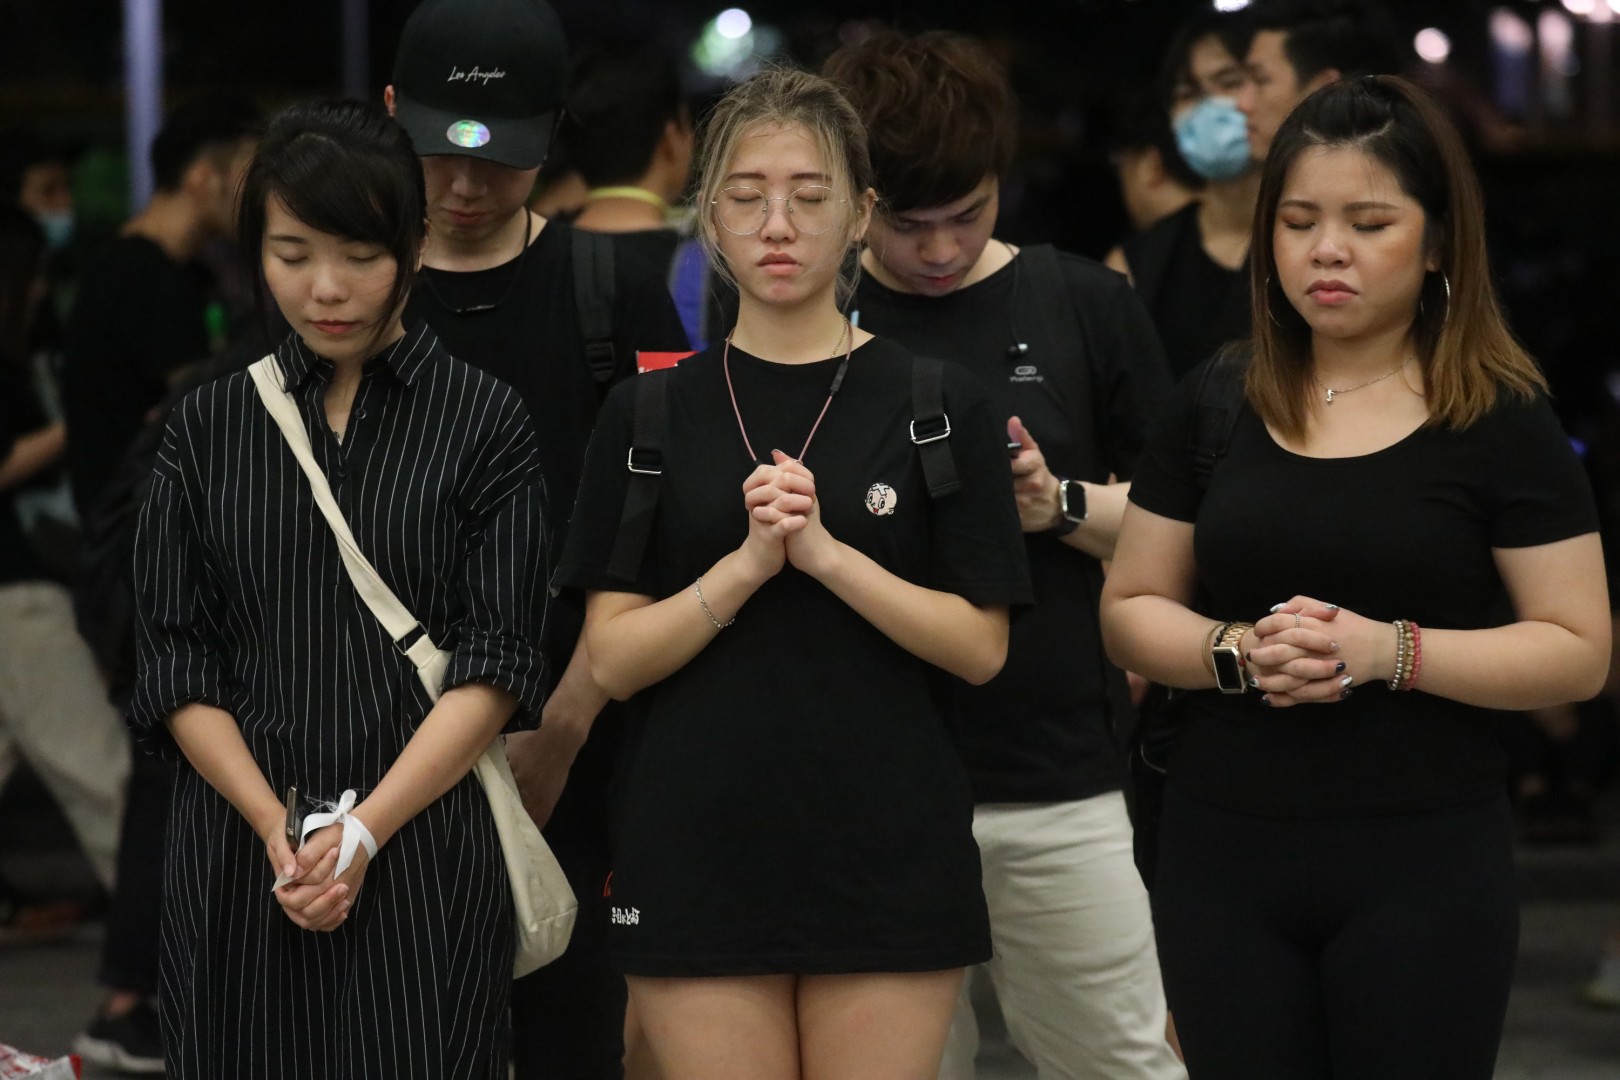 As a peaceful protest march concludes in Hong Kong, those who remain on the streets pray for the city's future. Photo: Dickson Lee